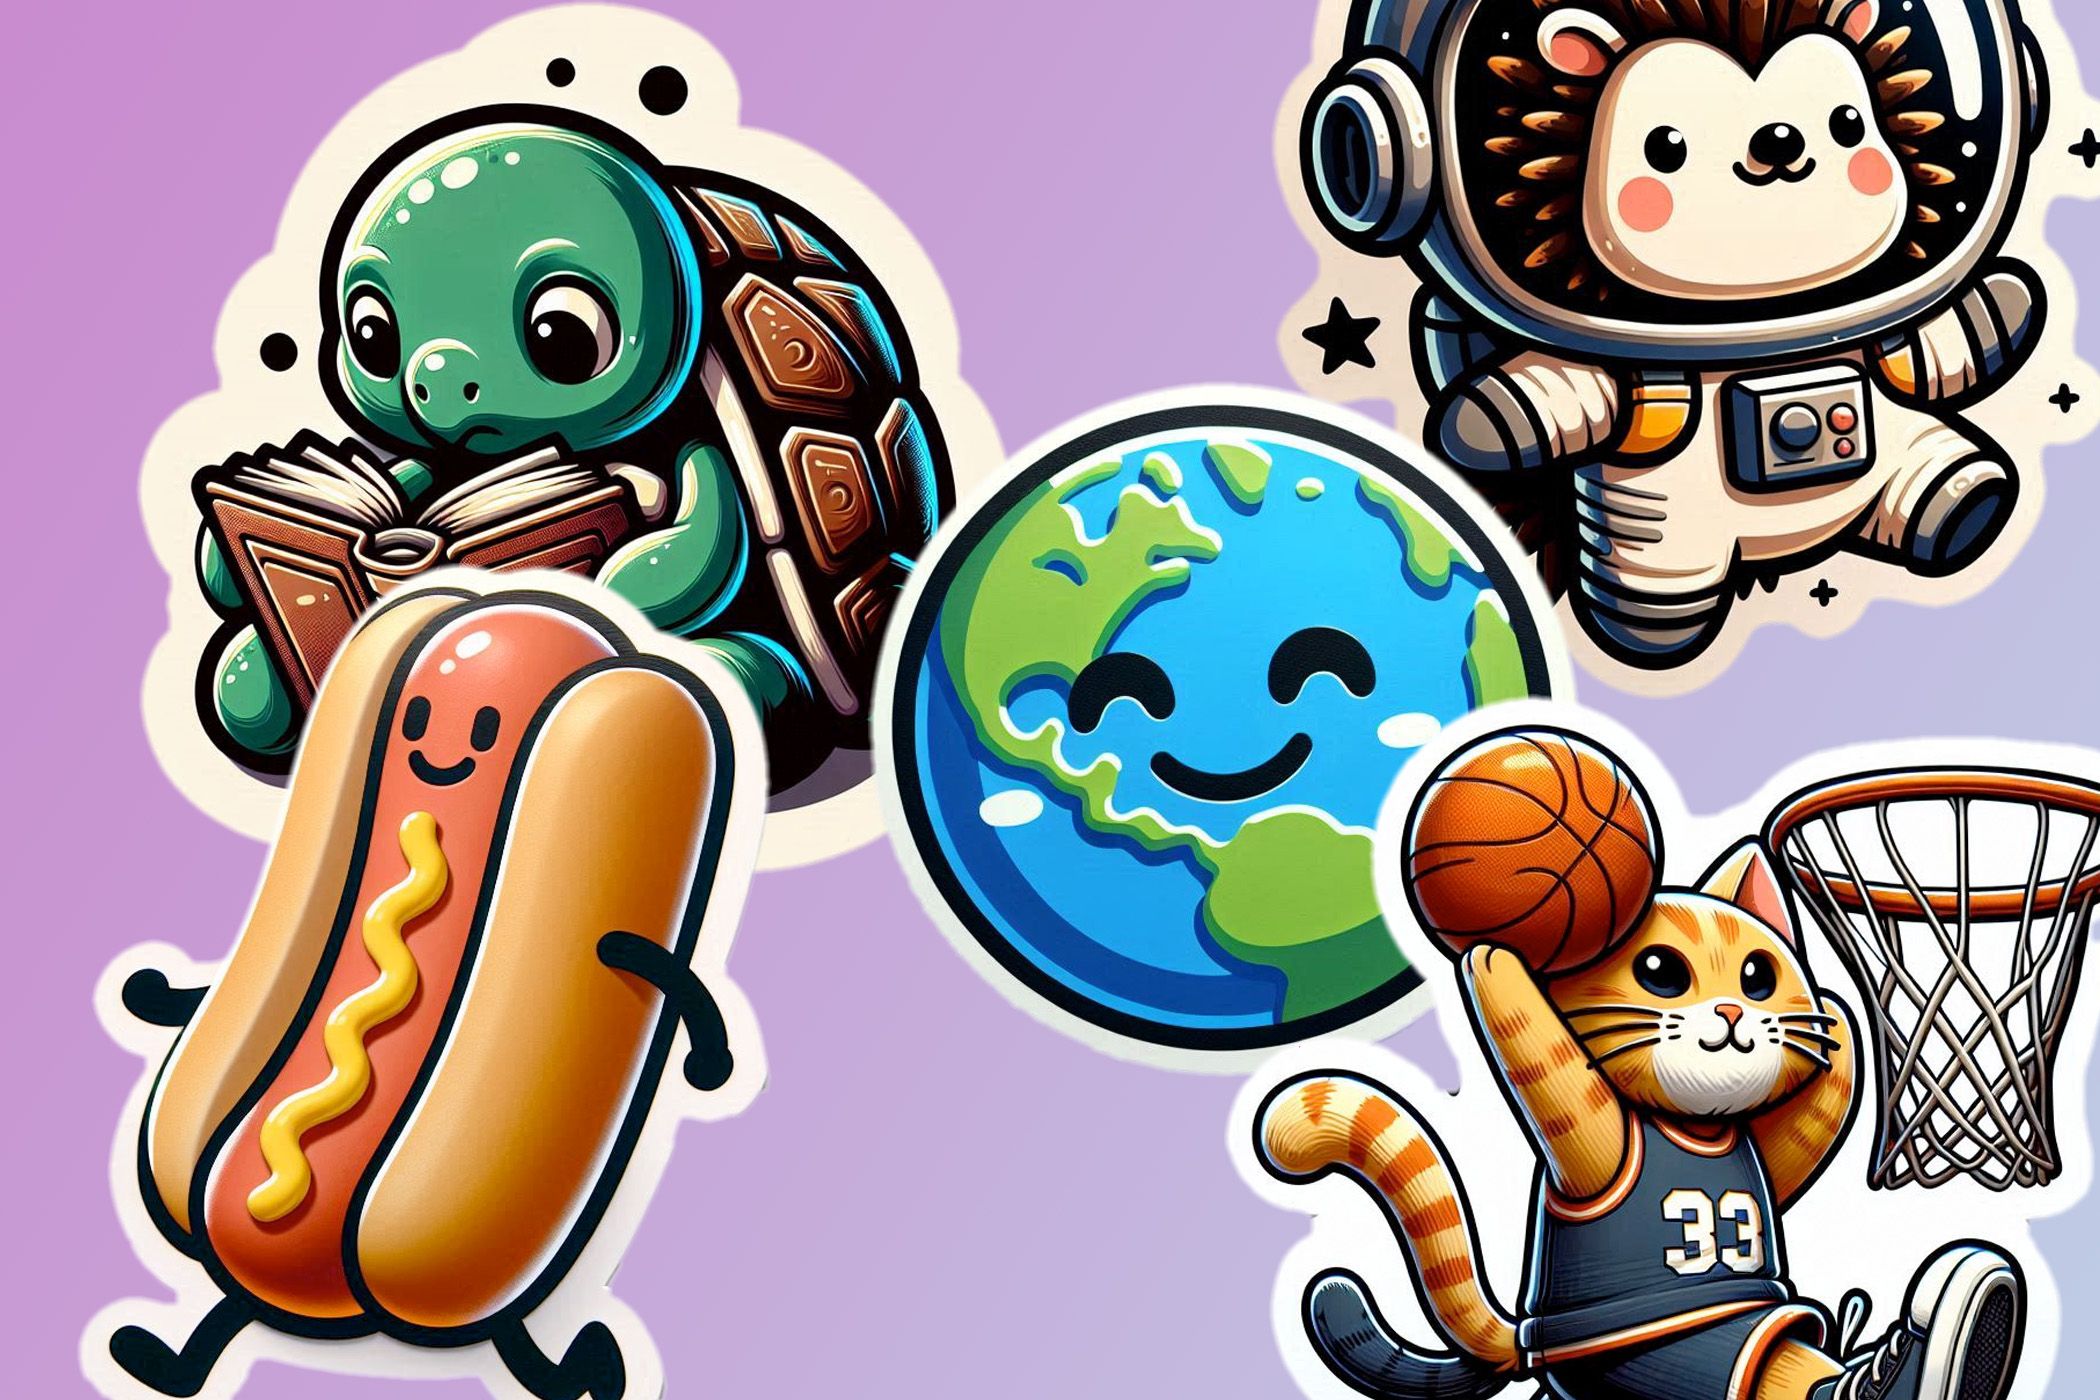 Stickers of a hot dog stick figure, a smiling Earth, a cat playing basketball, a turtle reading, and an astronaut hedgehog.